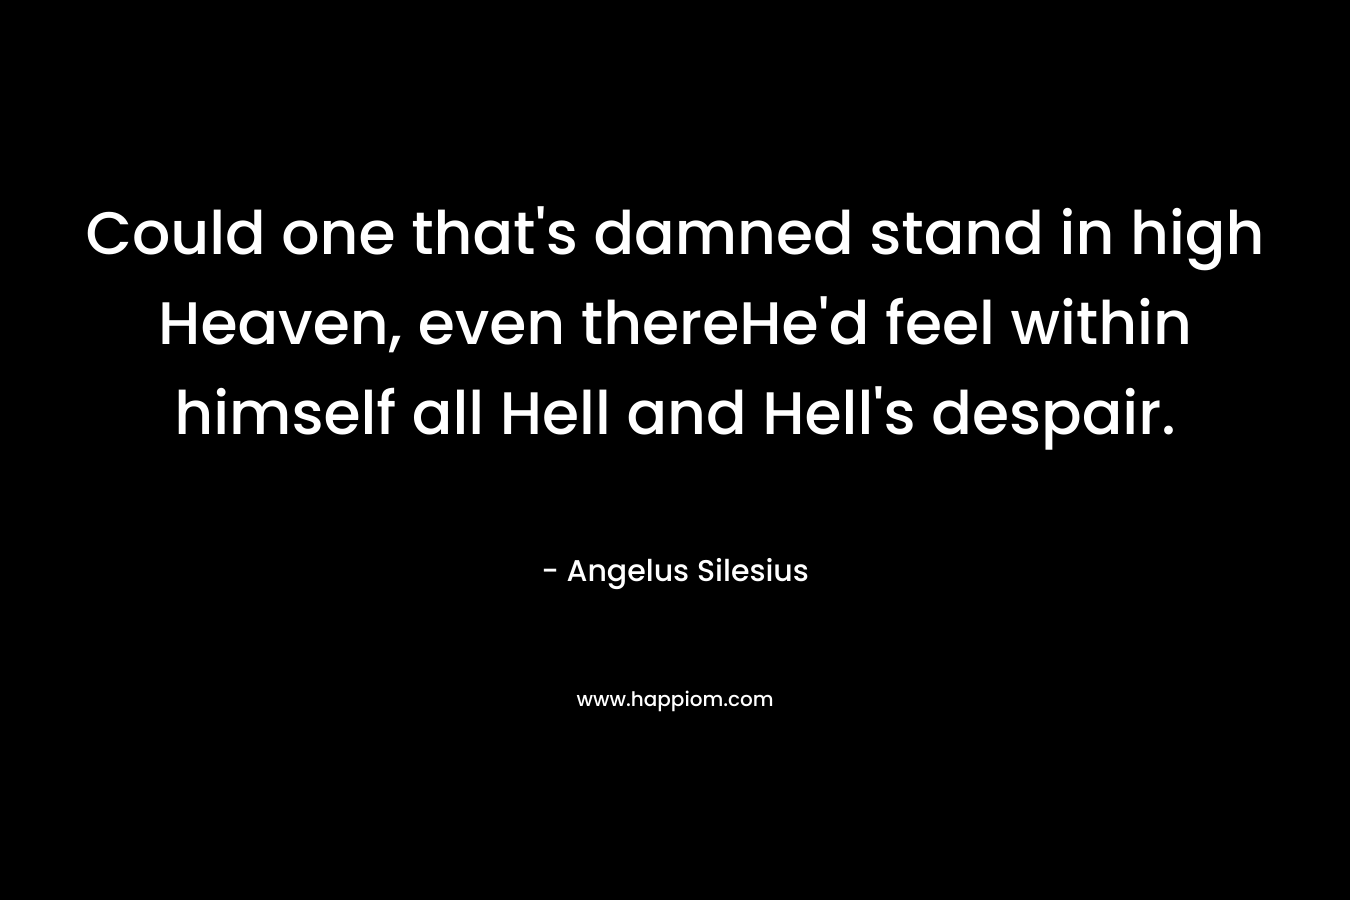 Could one that’s damned stand in high Heaven, even thereHe’d feel within himself all Hell and Hell’s despair. – Angelus Silesius